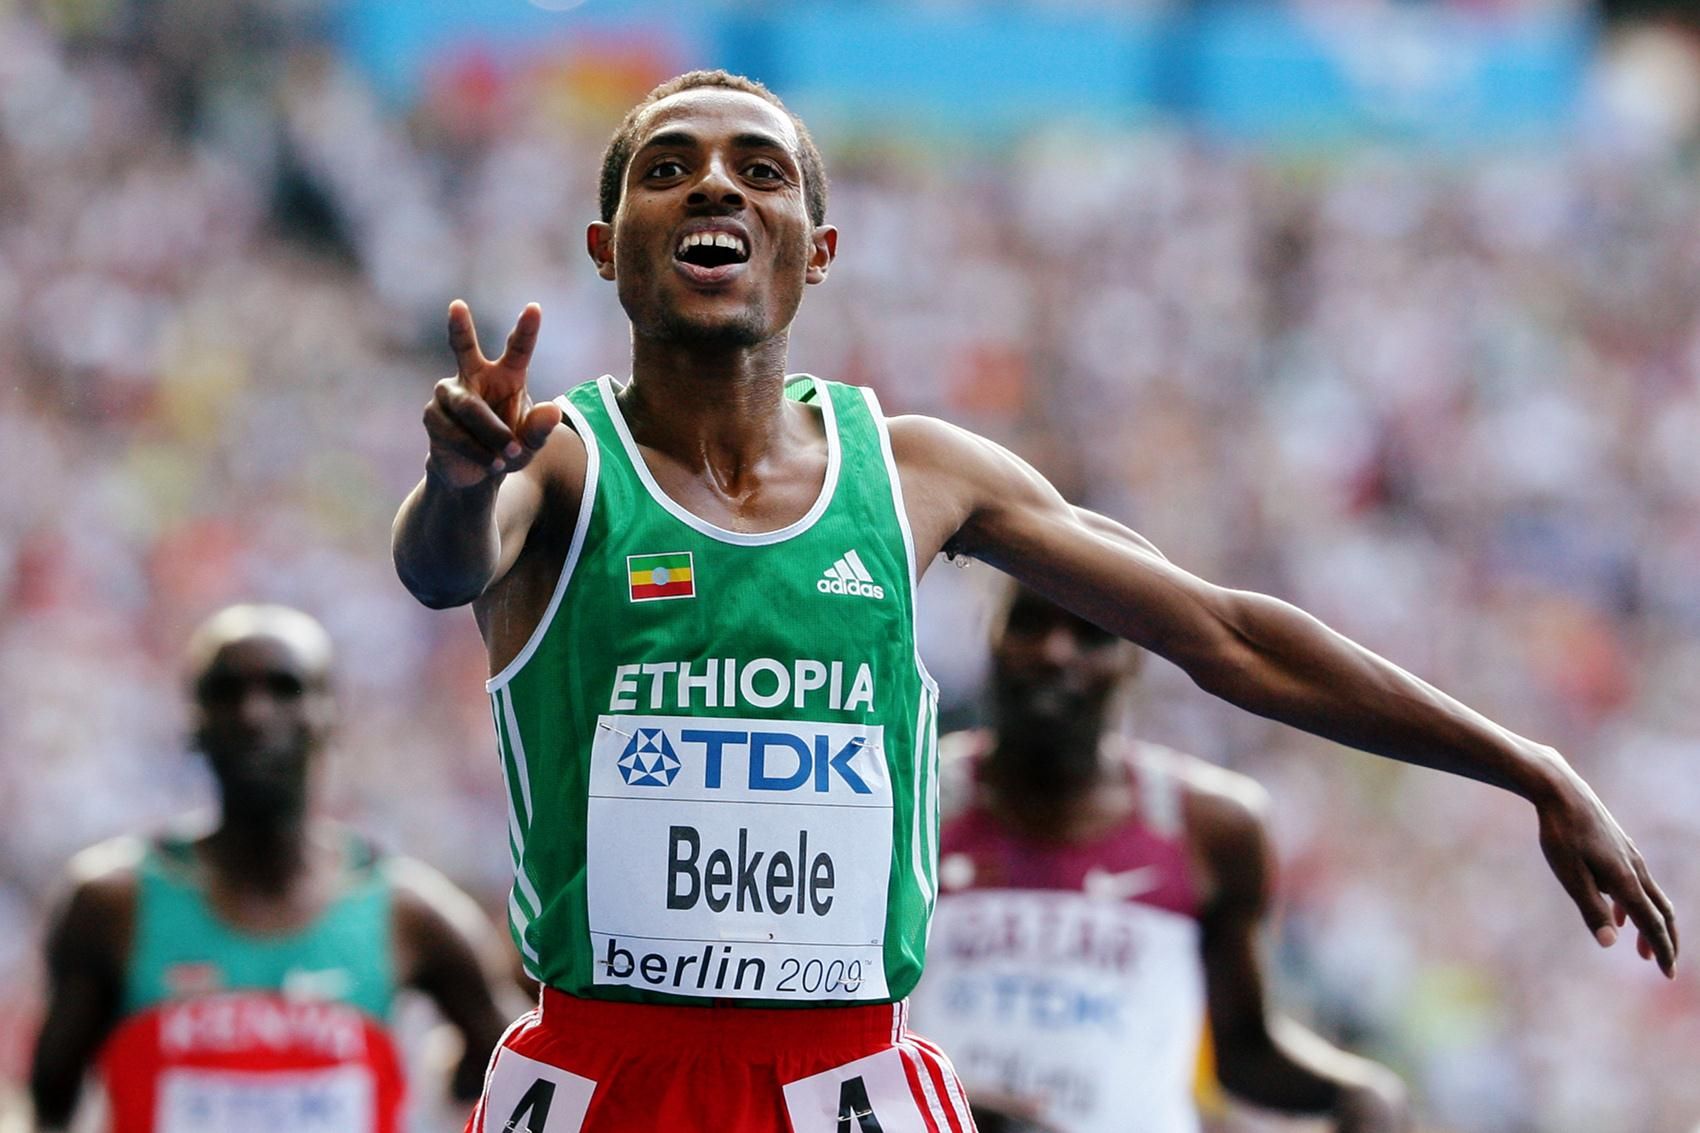 In Berlin 2009, another World 5000m gold for Kenenisa Bekele